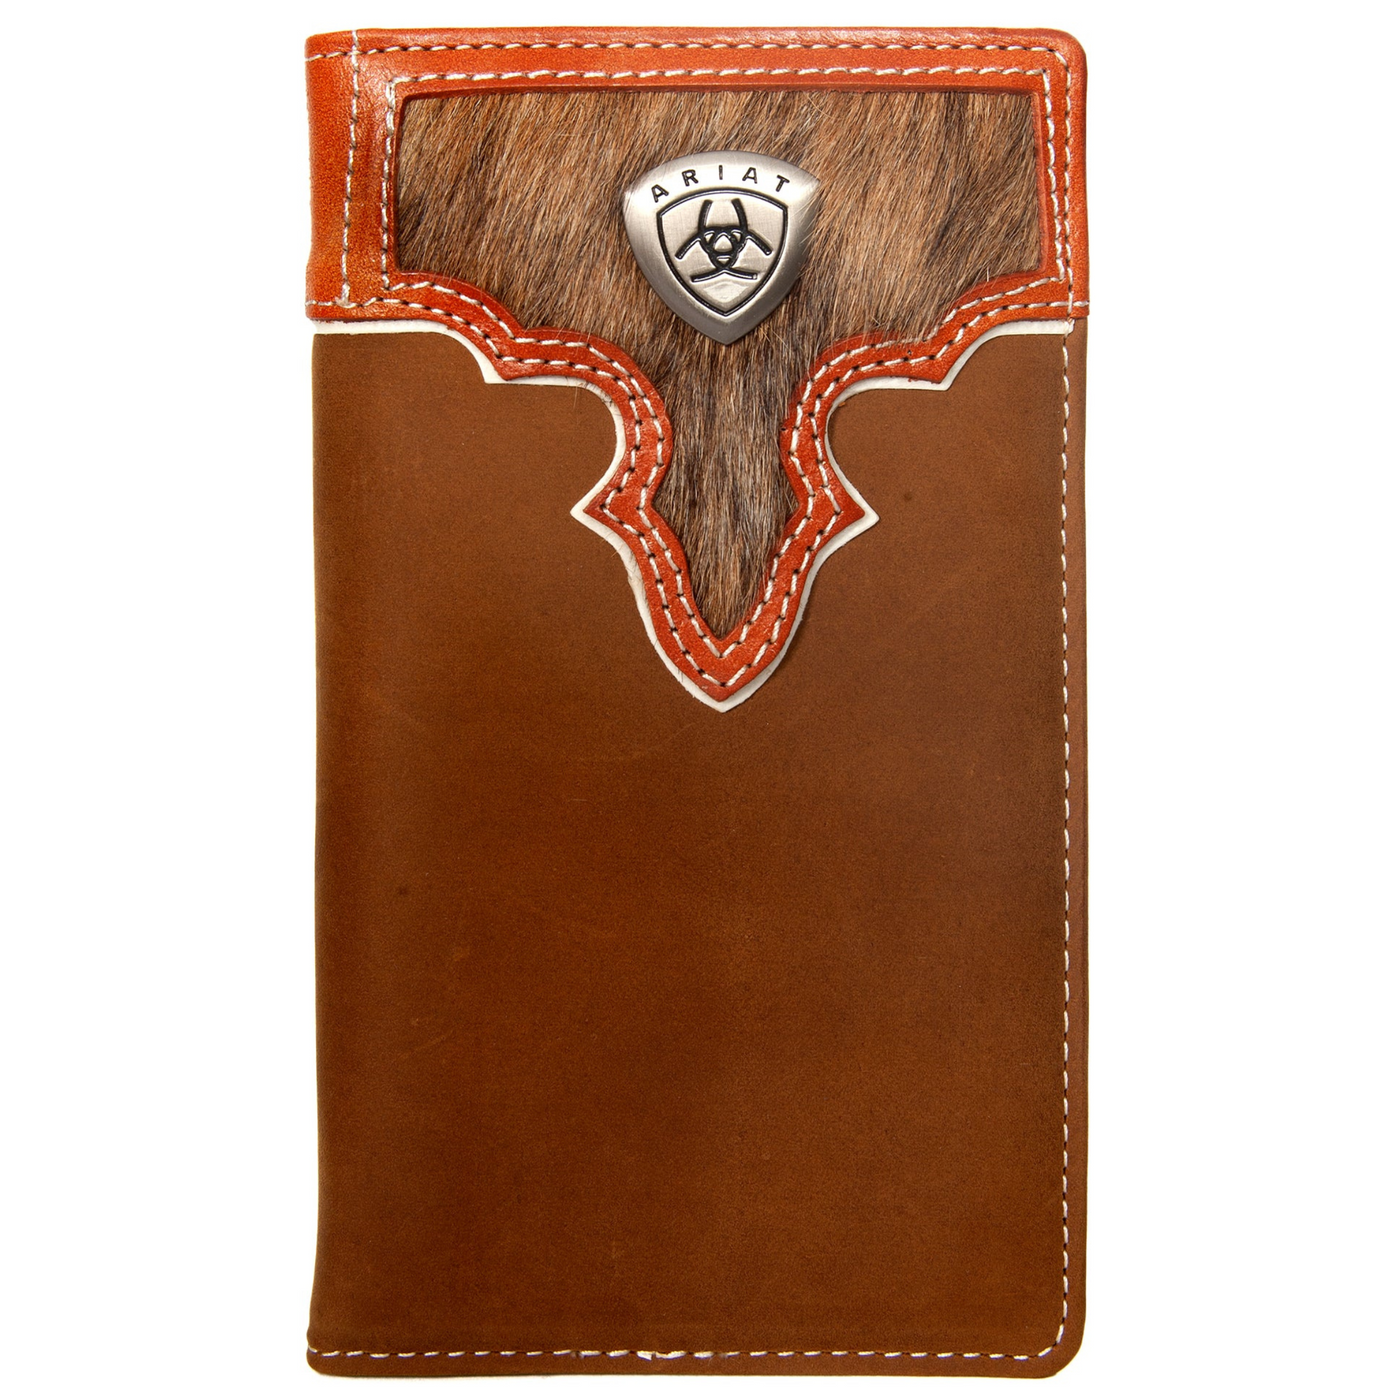 Ariat Rodeo Wallet-Two Toned Hair  |  Brown